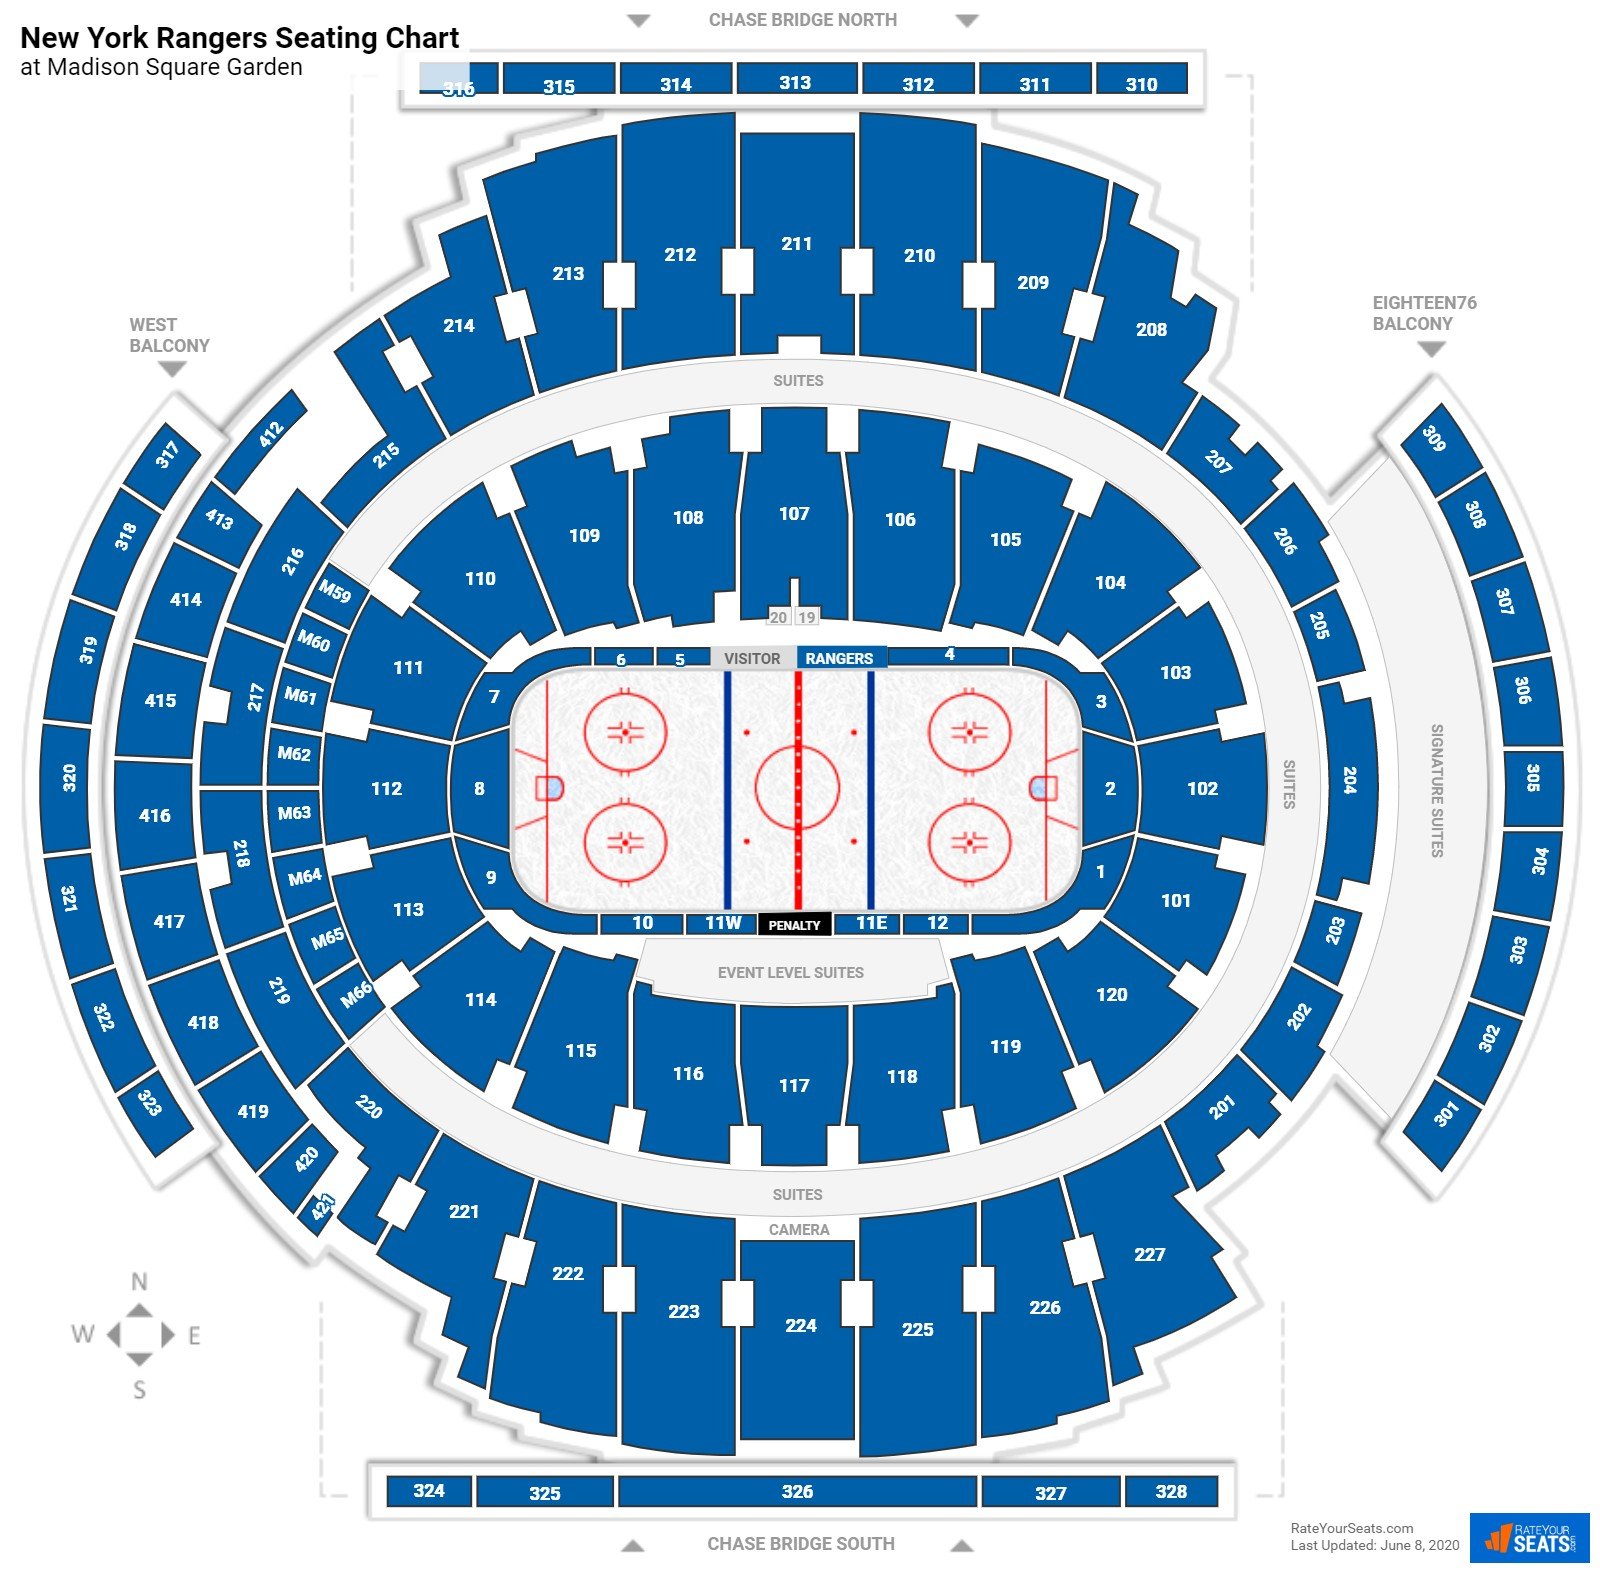 New York Rangers Seating Charts at Madison Square Garden